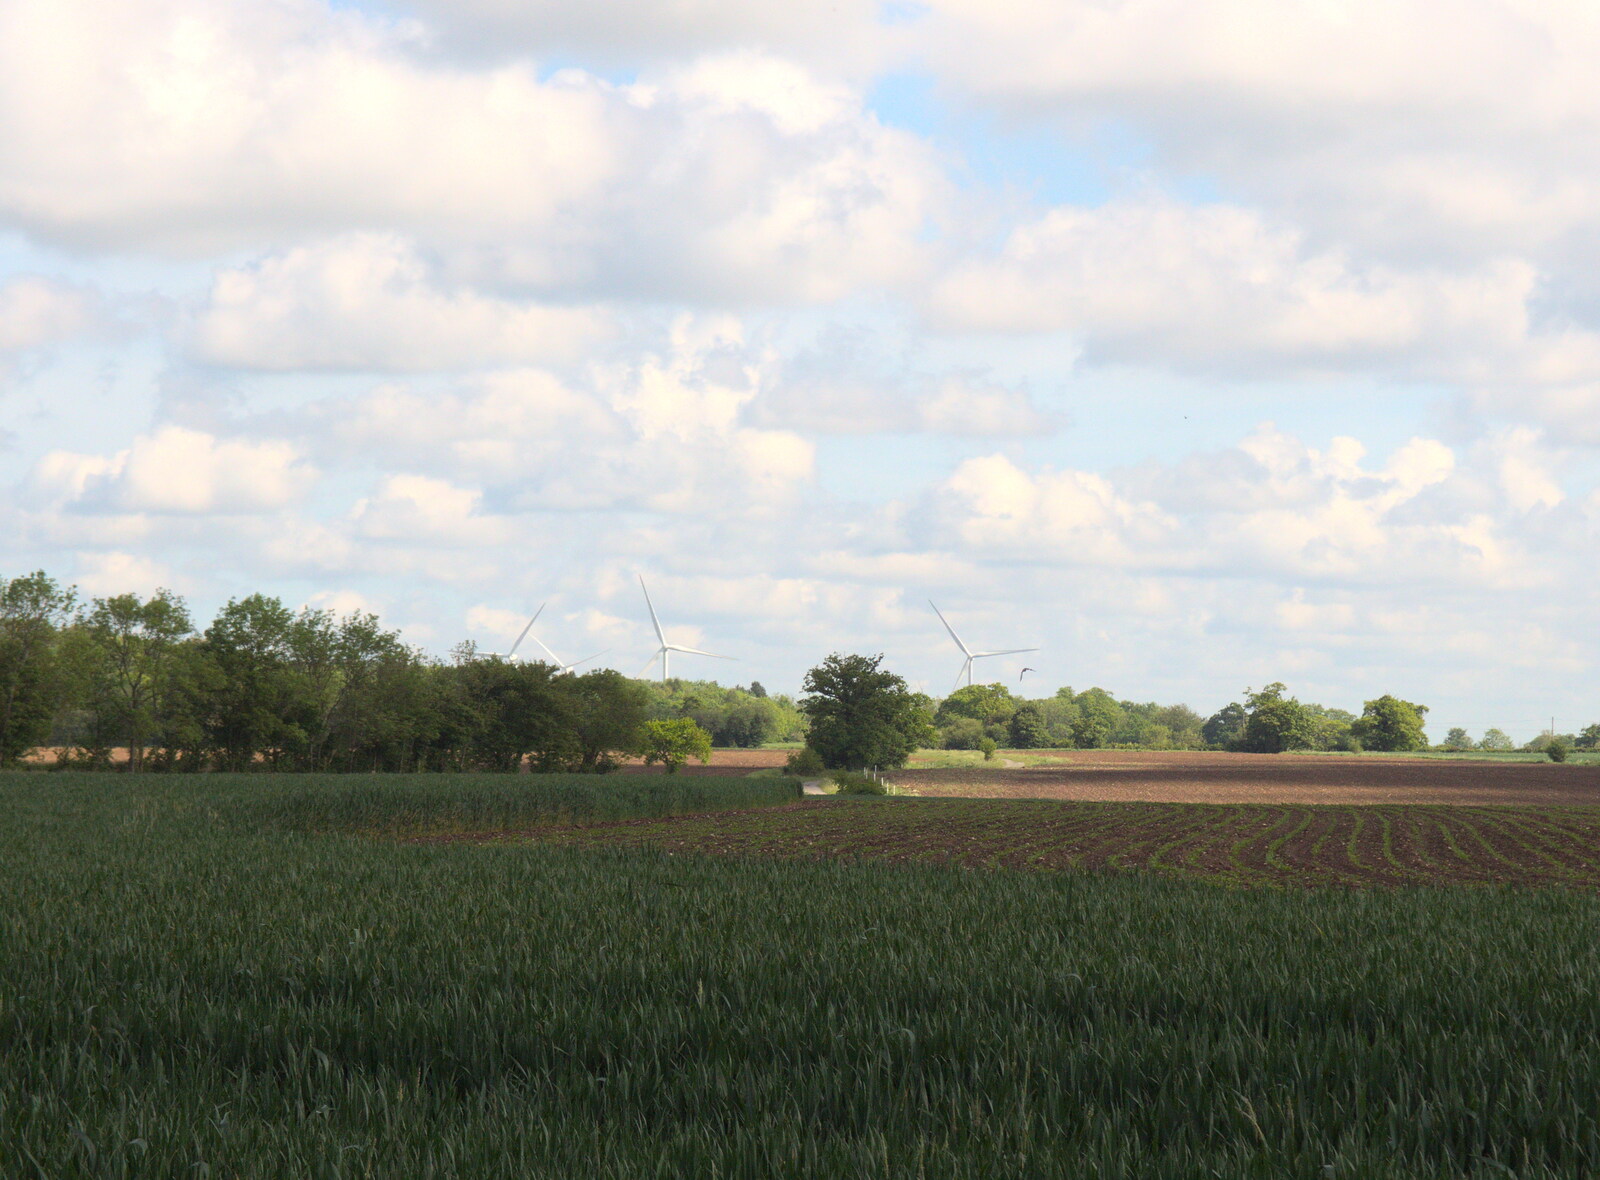 The wind turbines of eye in the distance from Clive and Suzanne's Party, Braisworth, Suffolk - 21st May 2017